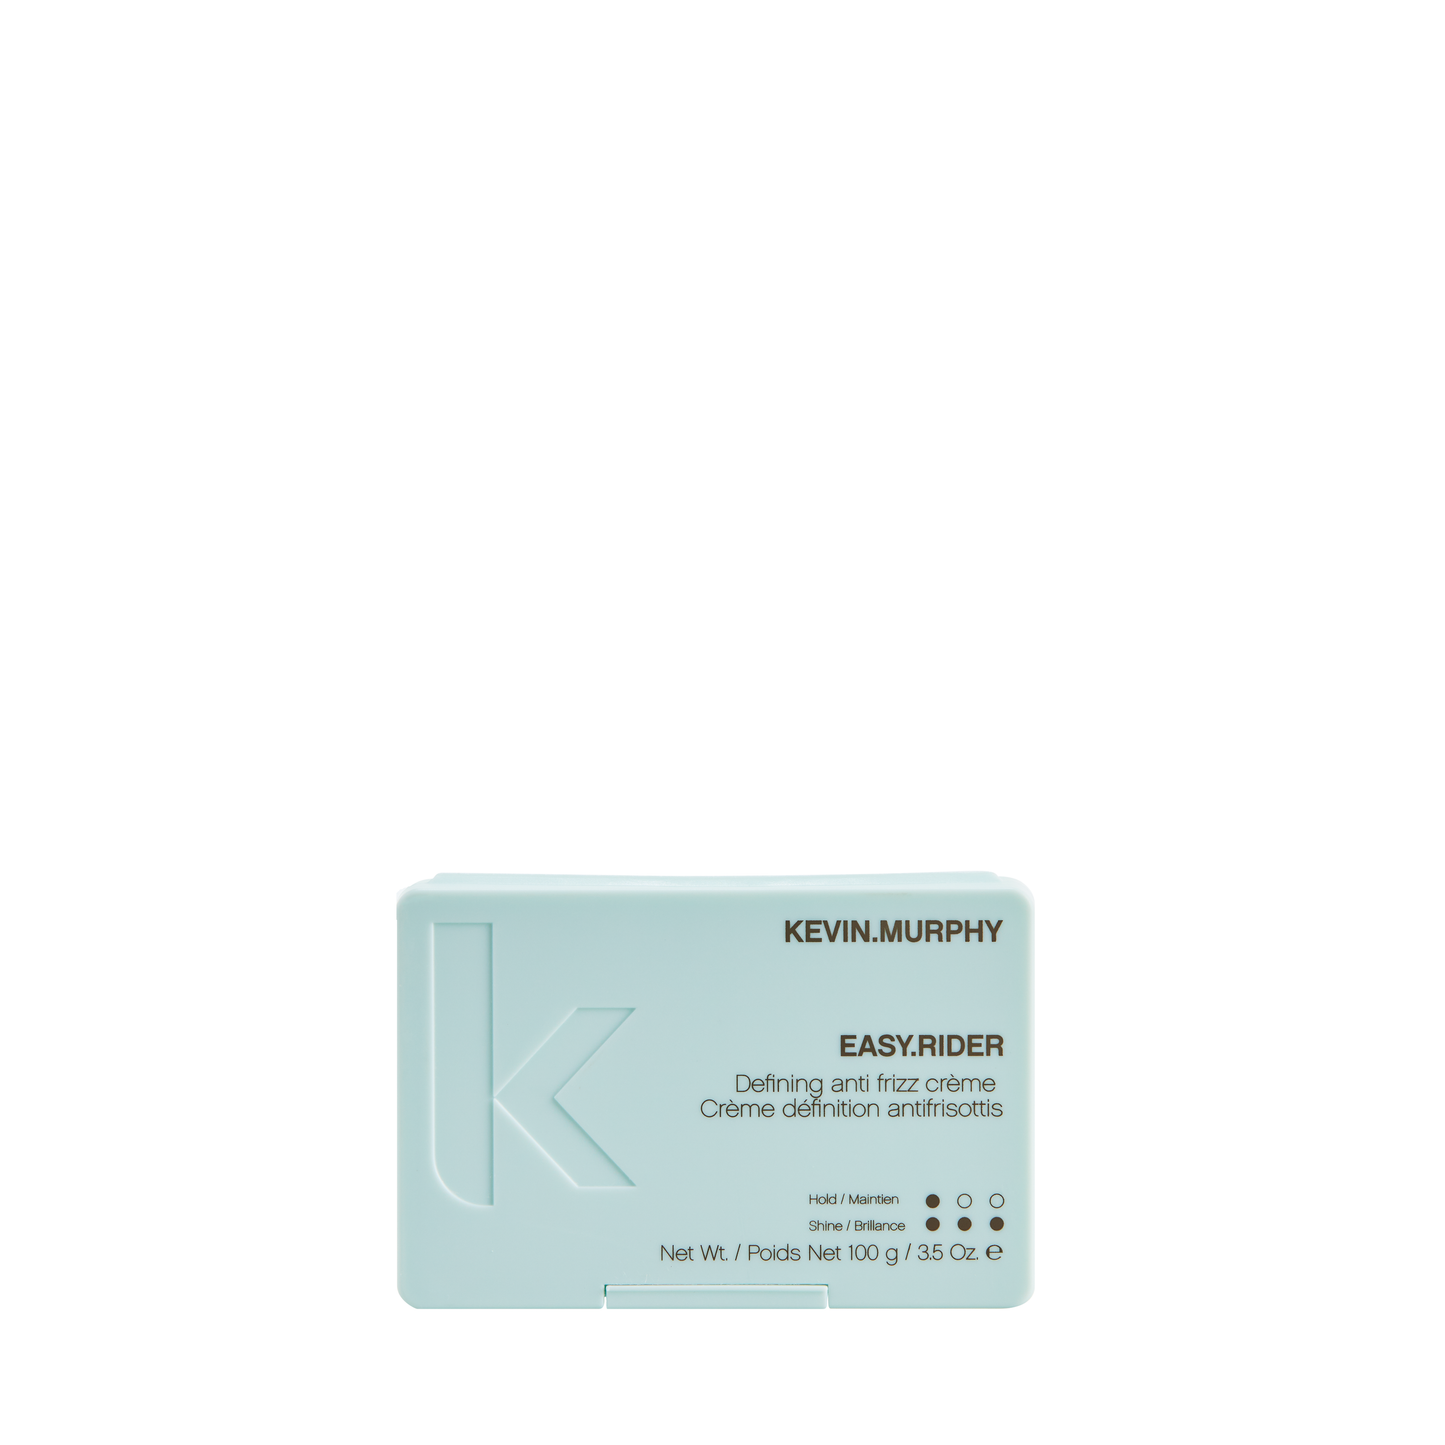 KEVIN.MURPHY - EASY.RIDER 100ml